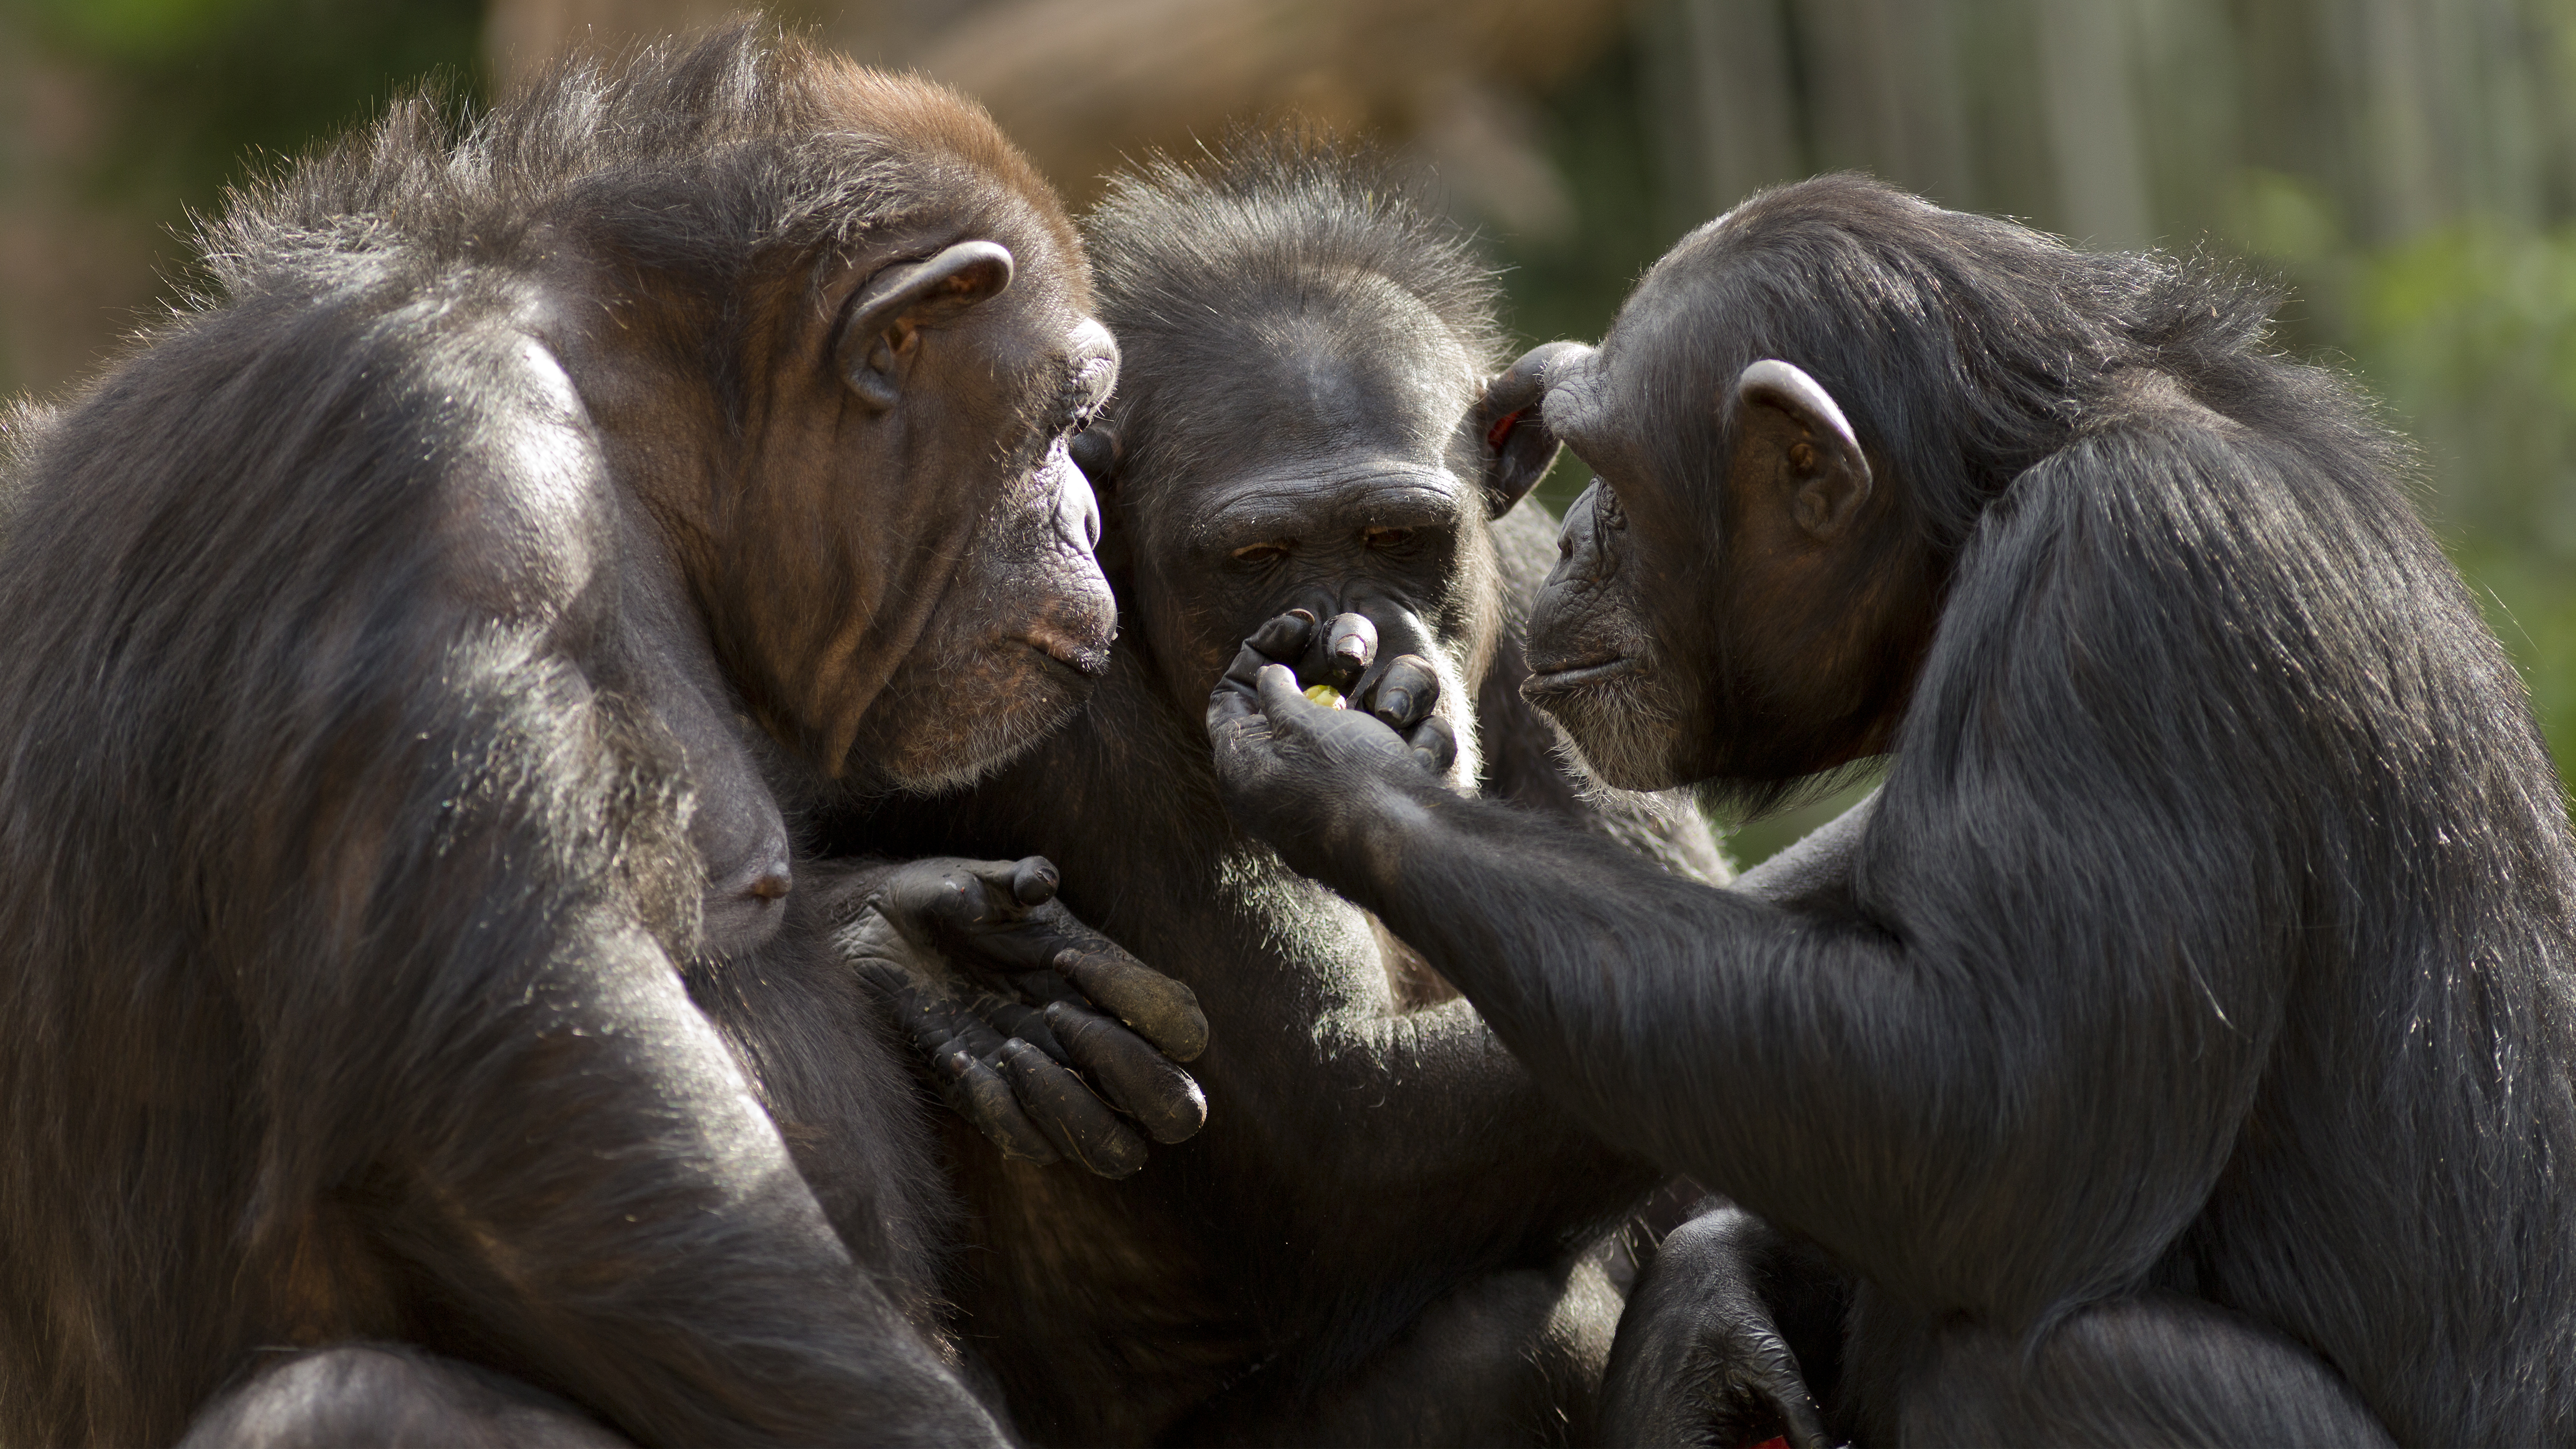 three chimpanzees sitting together looking at something in one of their hands